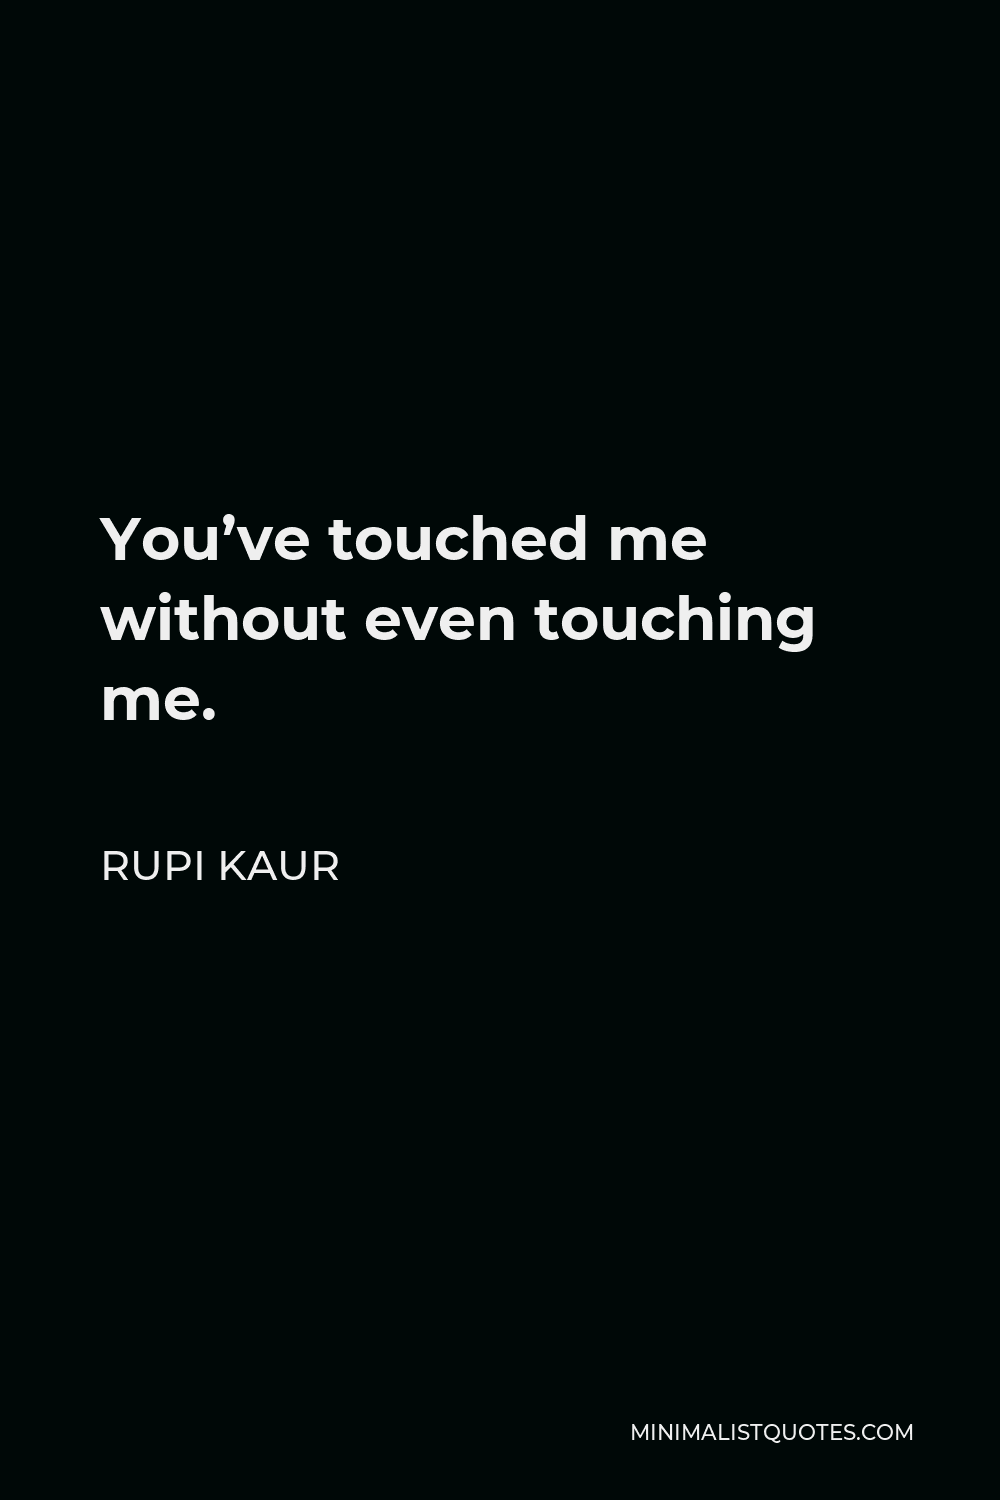 You've touched me
without even touching me